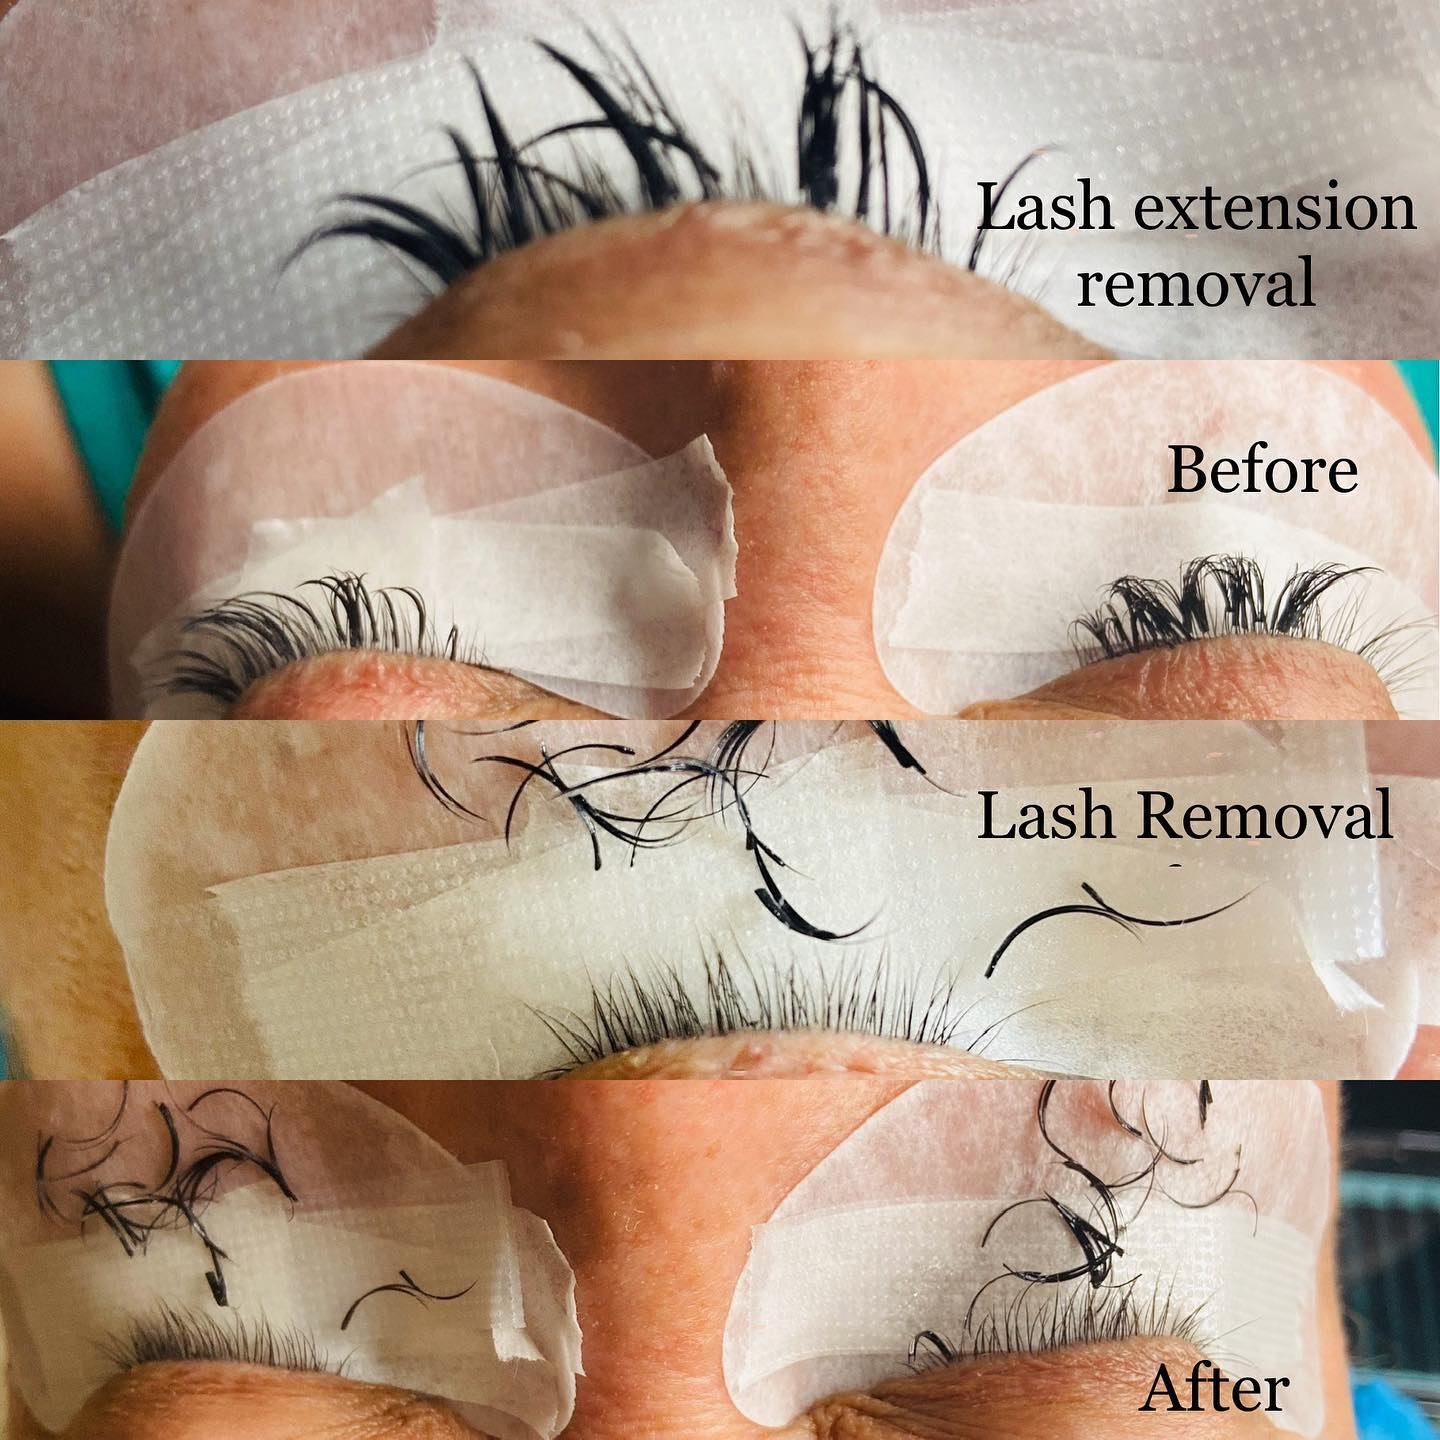 How to Remove lash Extensions